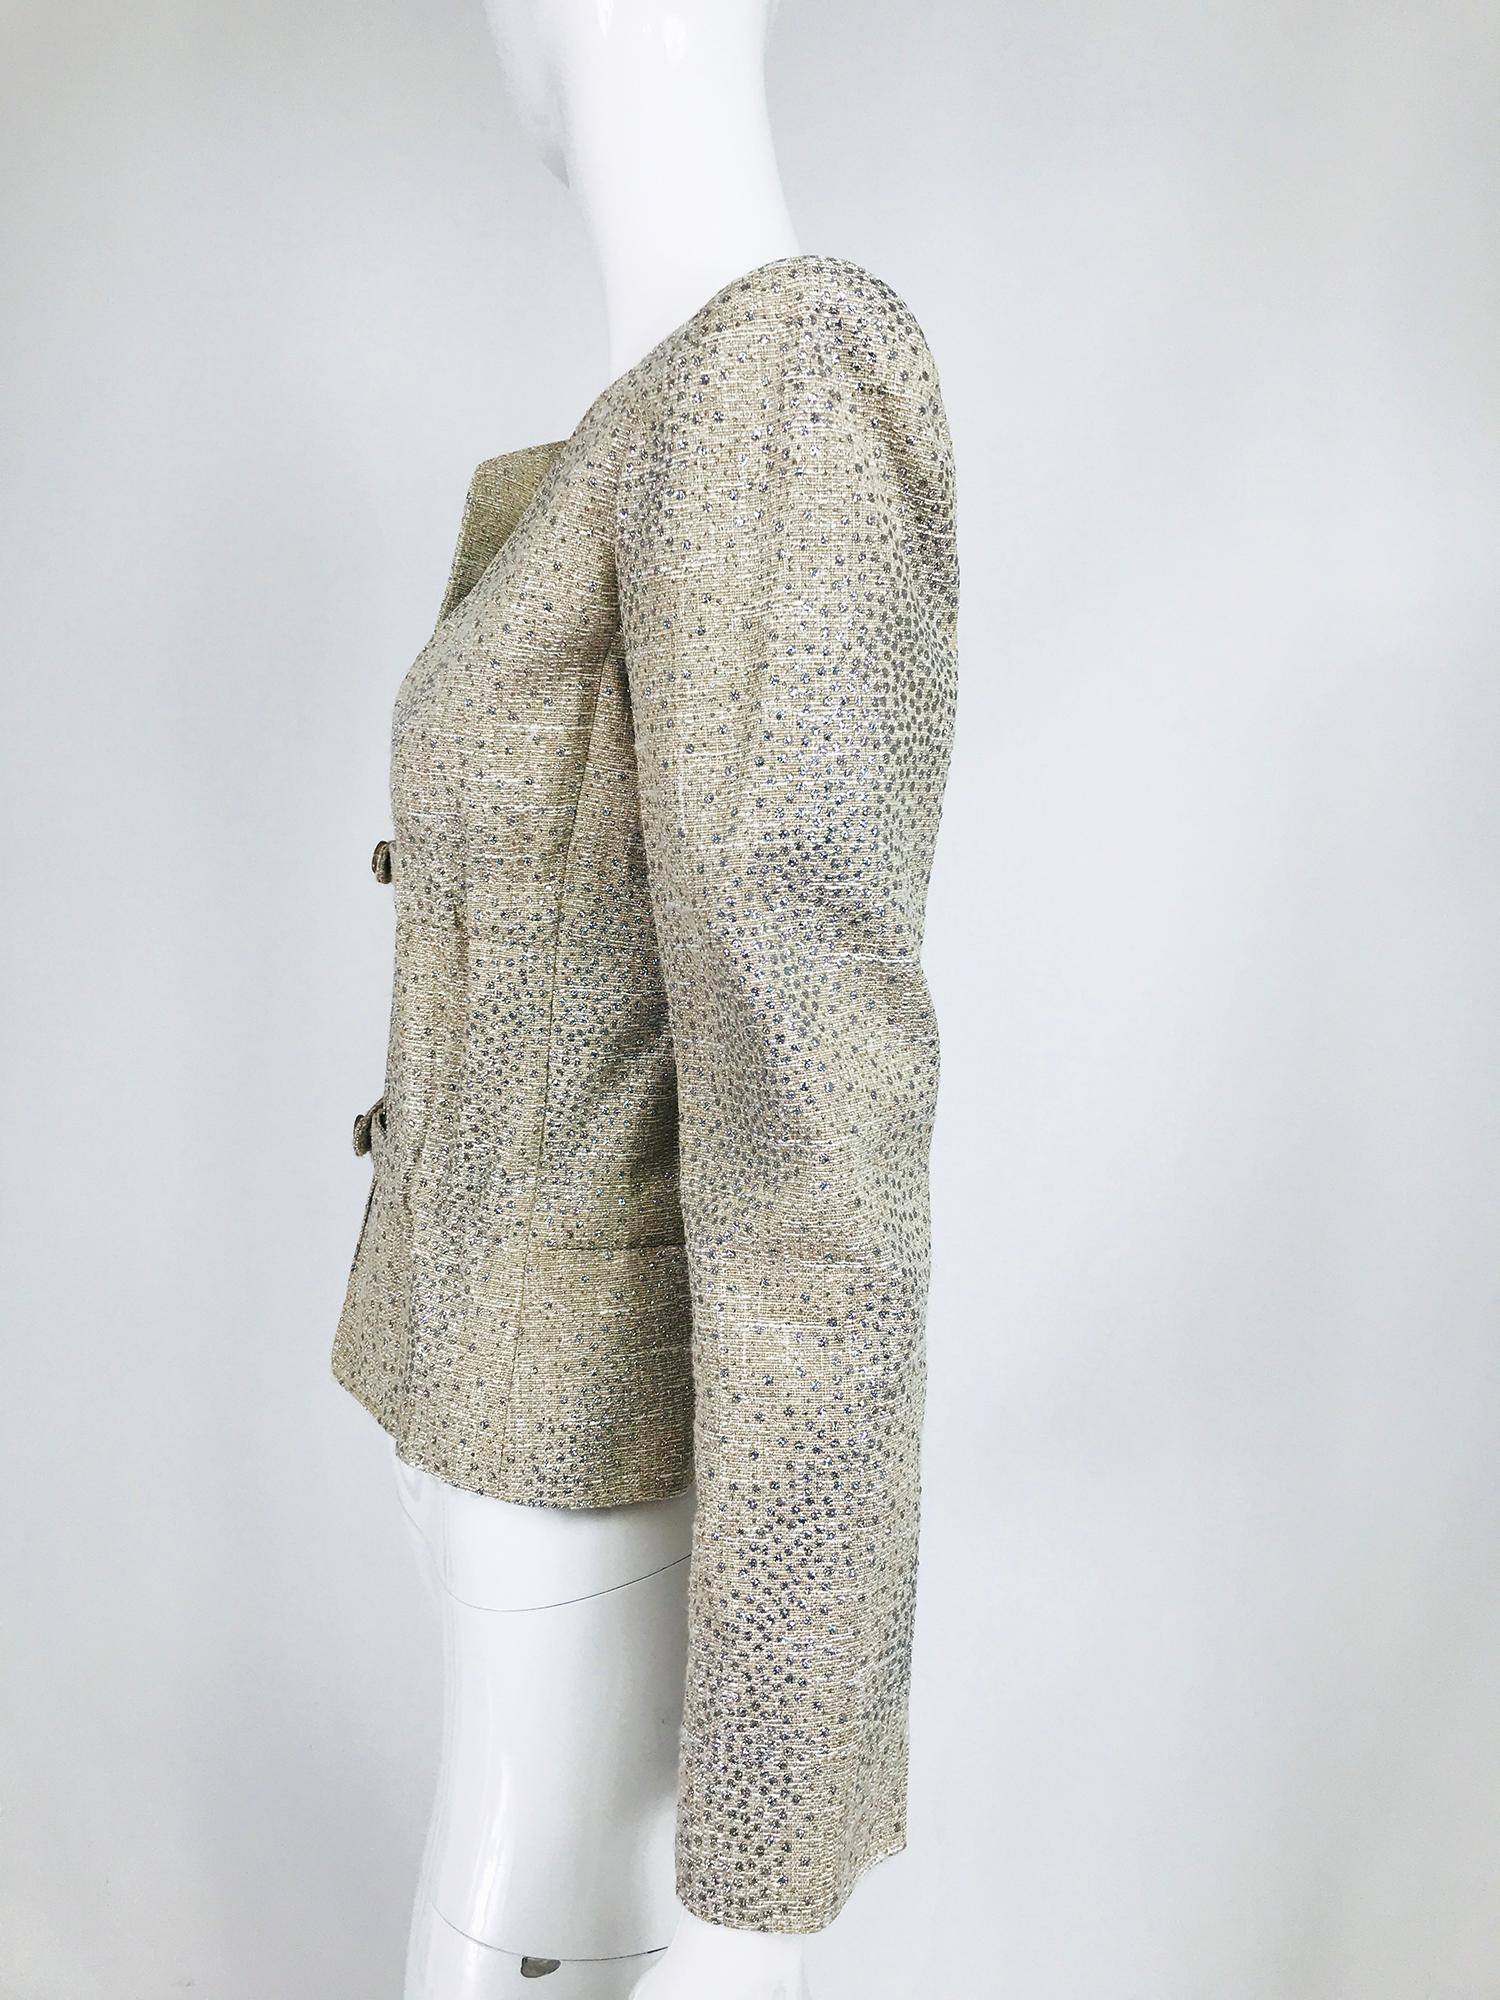 Valentino Glitter Silver Dot Metallic Gathered Waist Jacket  In Excellent Condition For Sale In West Palm Beach, FL